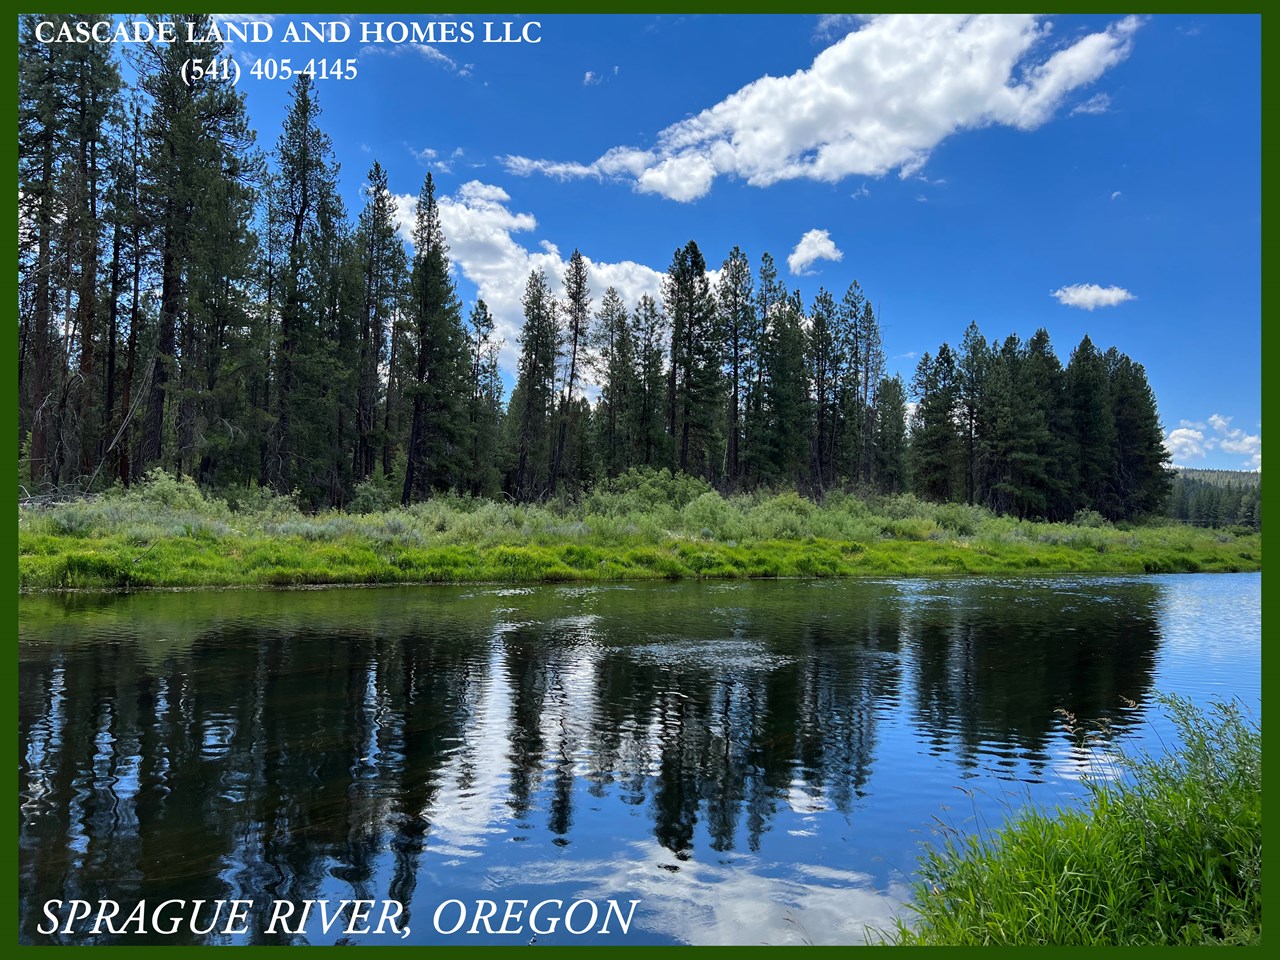 the nearby sprague river offers fishing, fly-fishing, rafting, boating, swimming, floating, or just watching the river peacefully flow by. if you love outdoor activities, this is the perfect place!